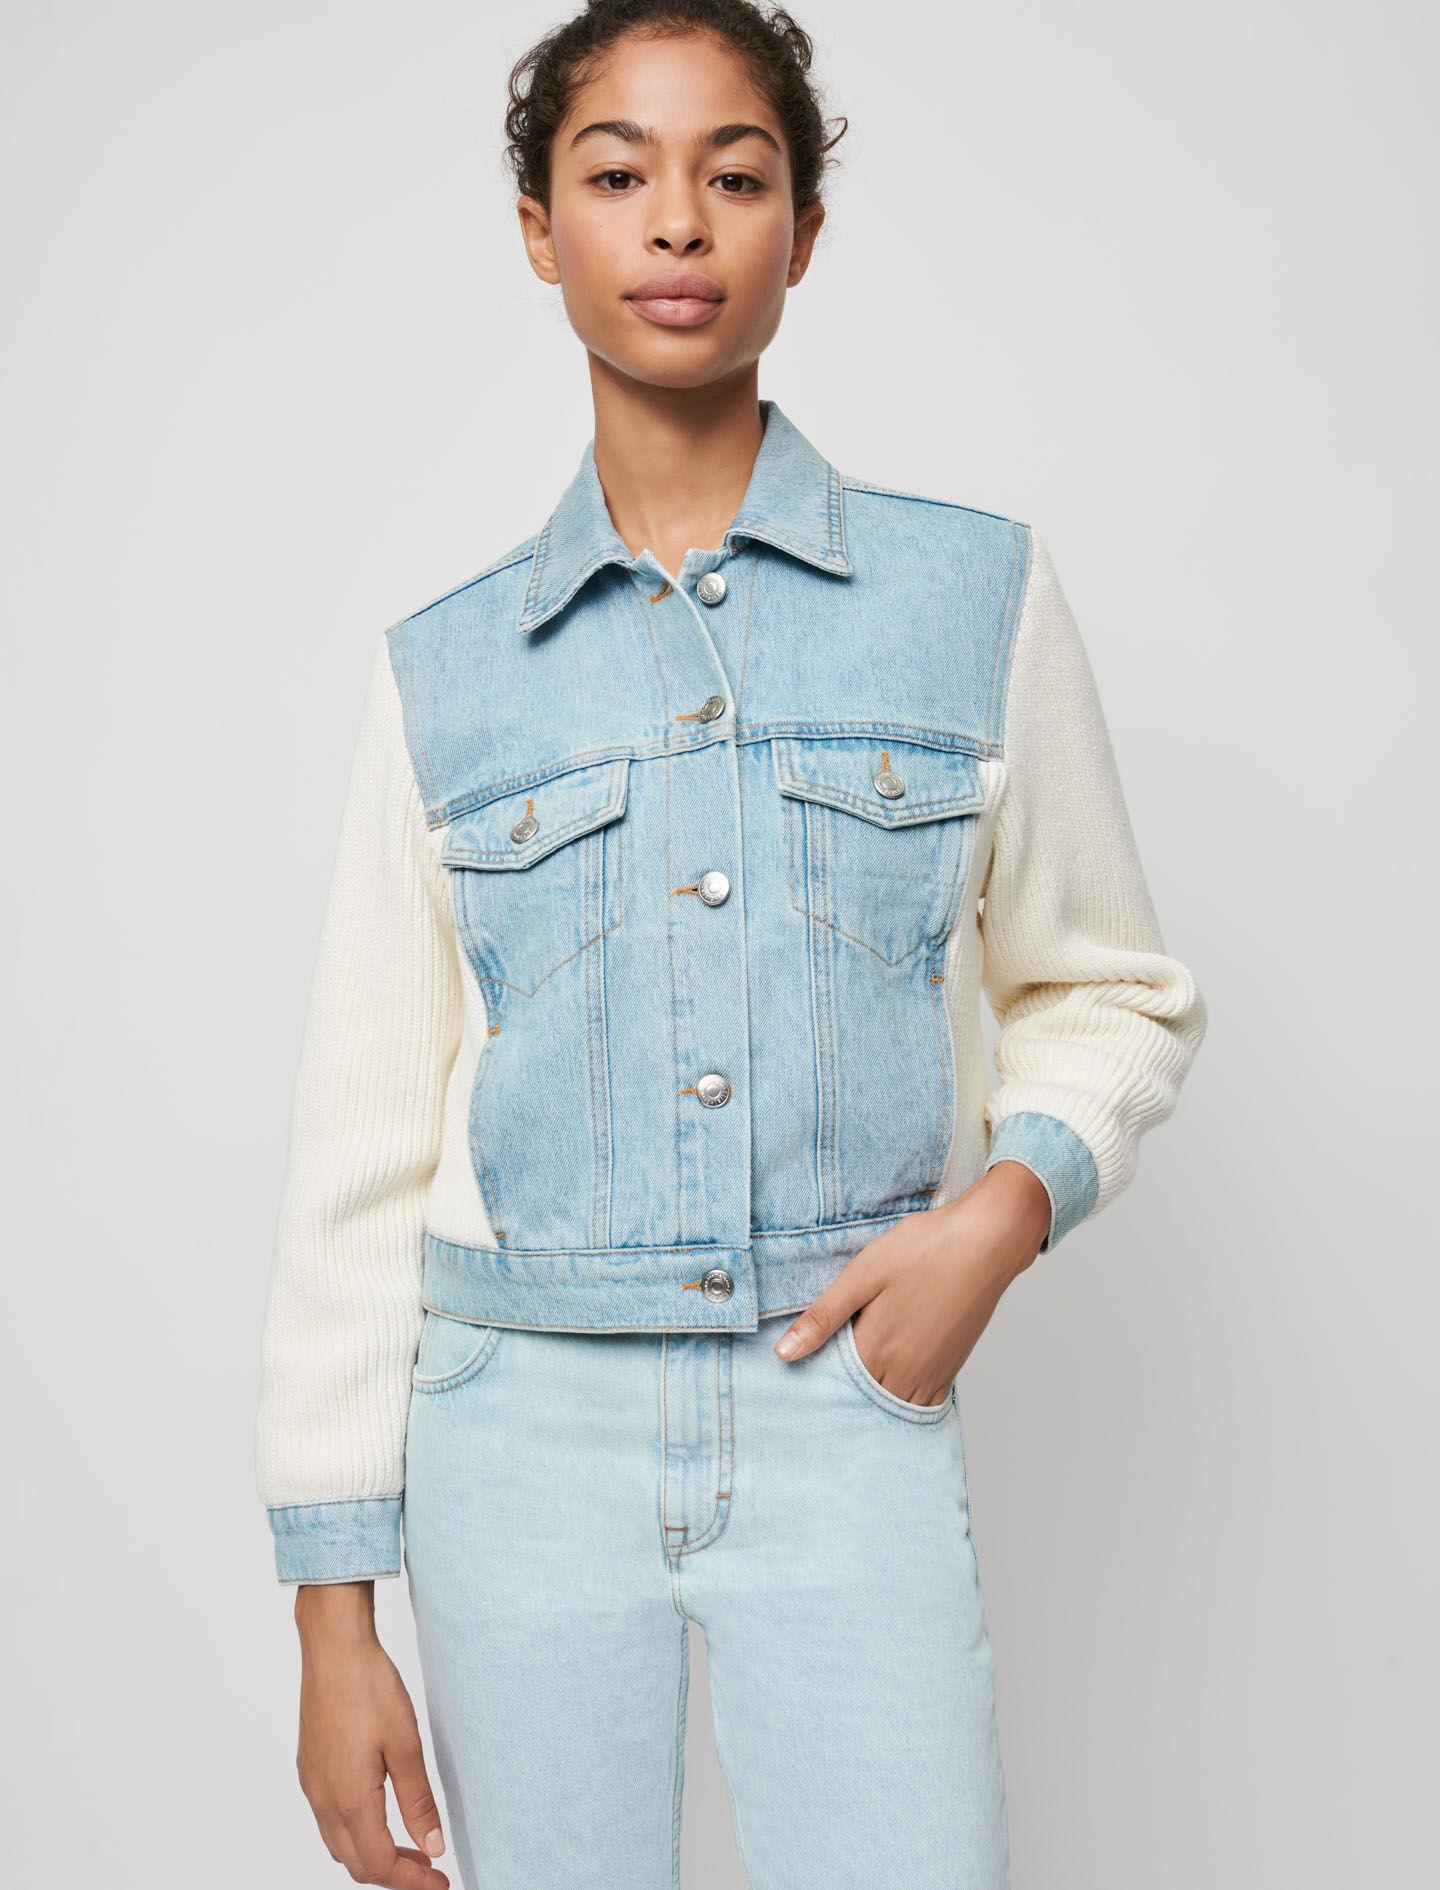 Maje Mixed Material Knit And Denim Jacket in Blue | Lyst